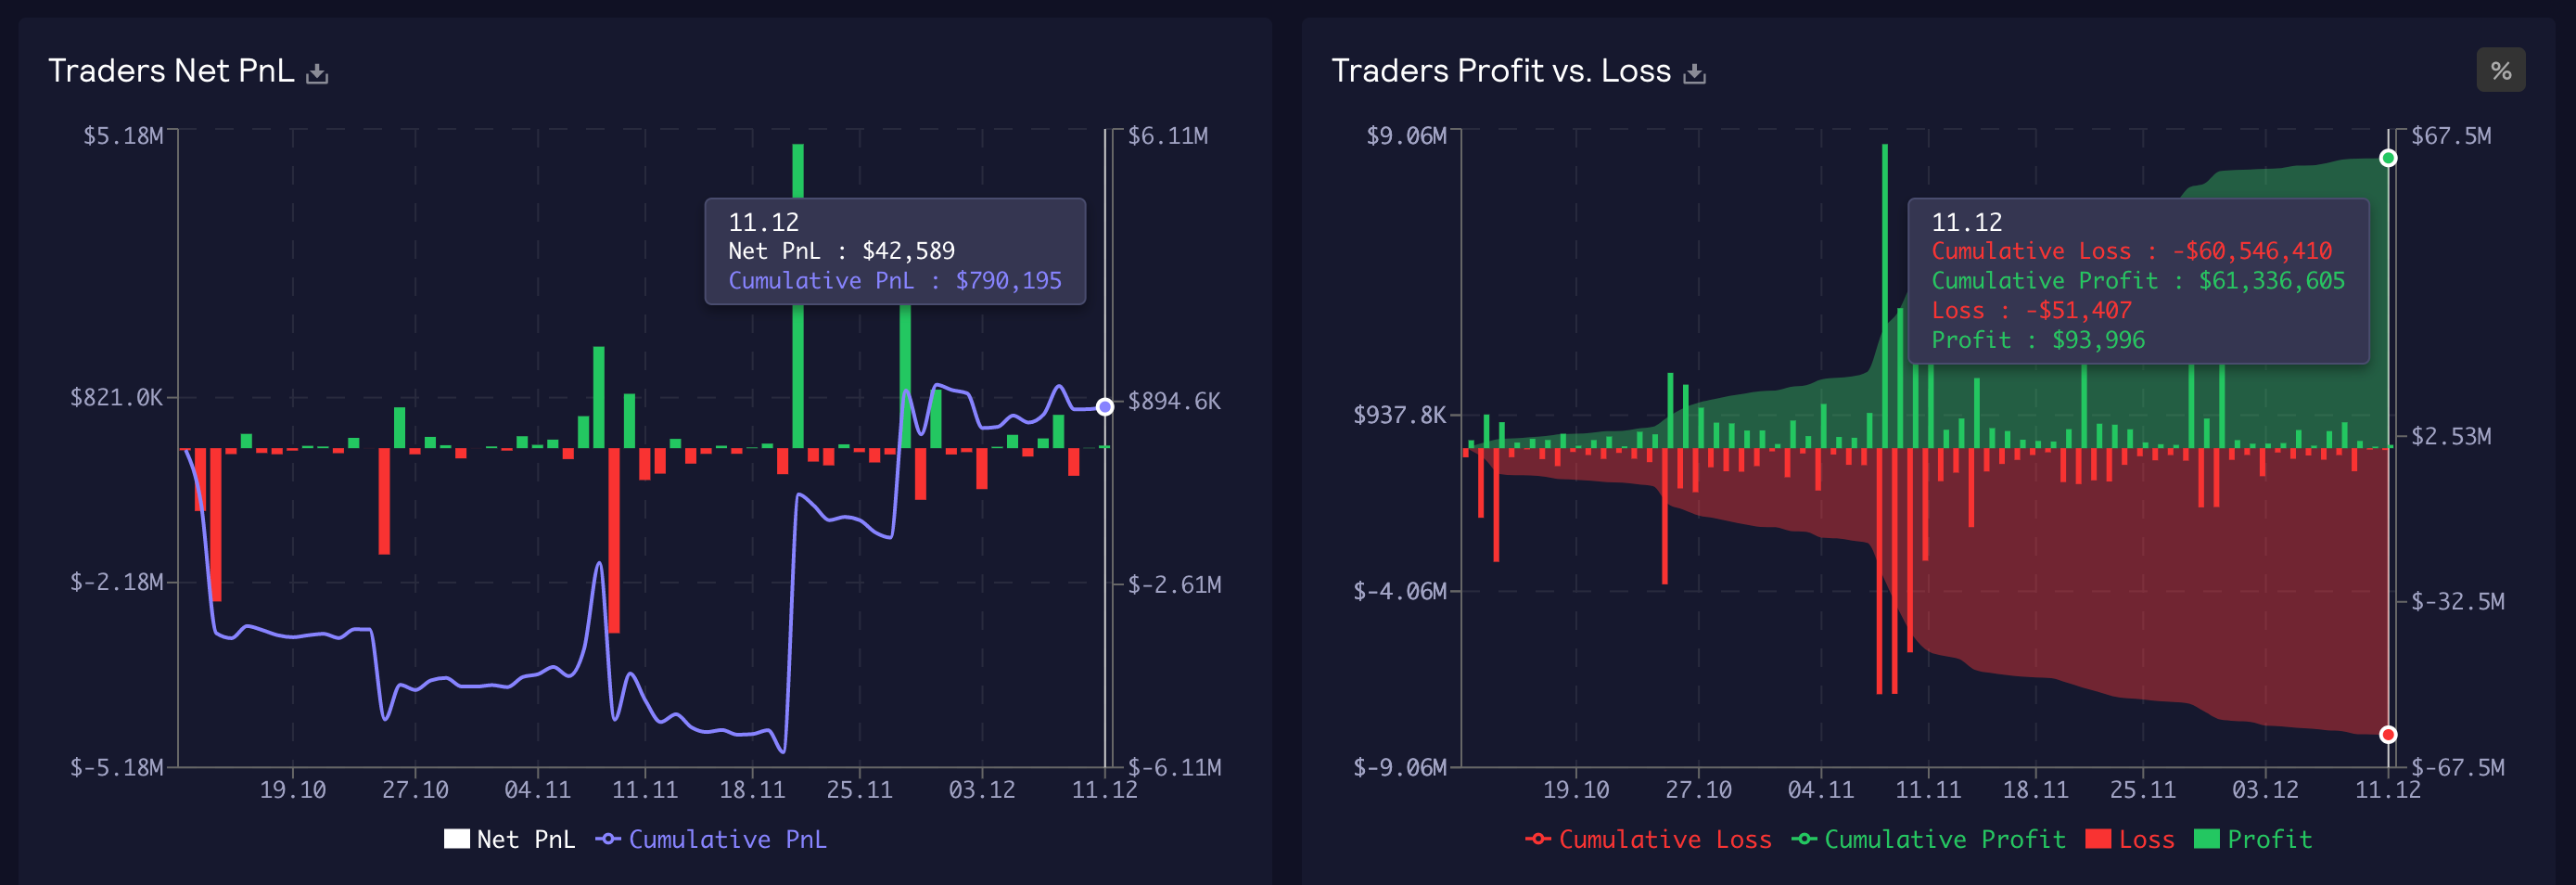 Charts showing Traders Net PnL and Traders Profit vs Loss at GMX against GLP holders